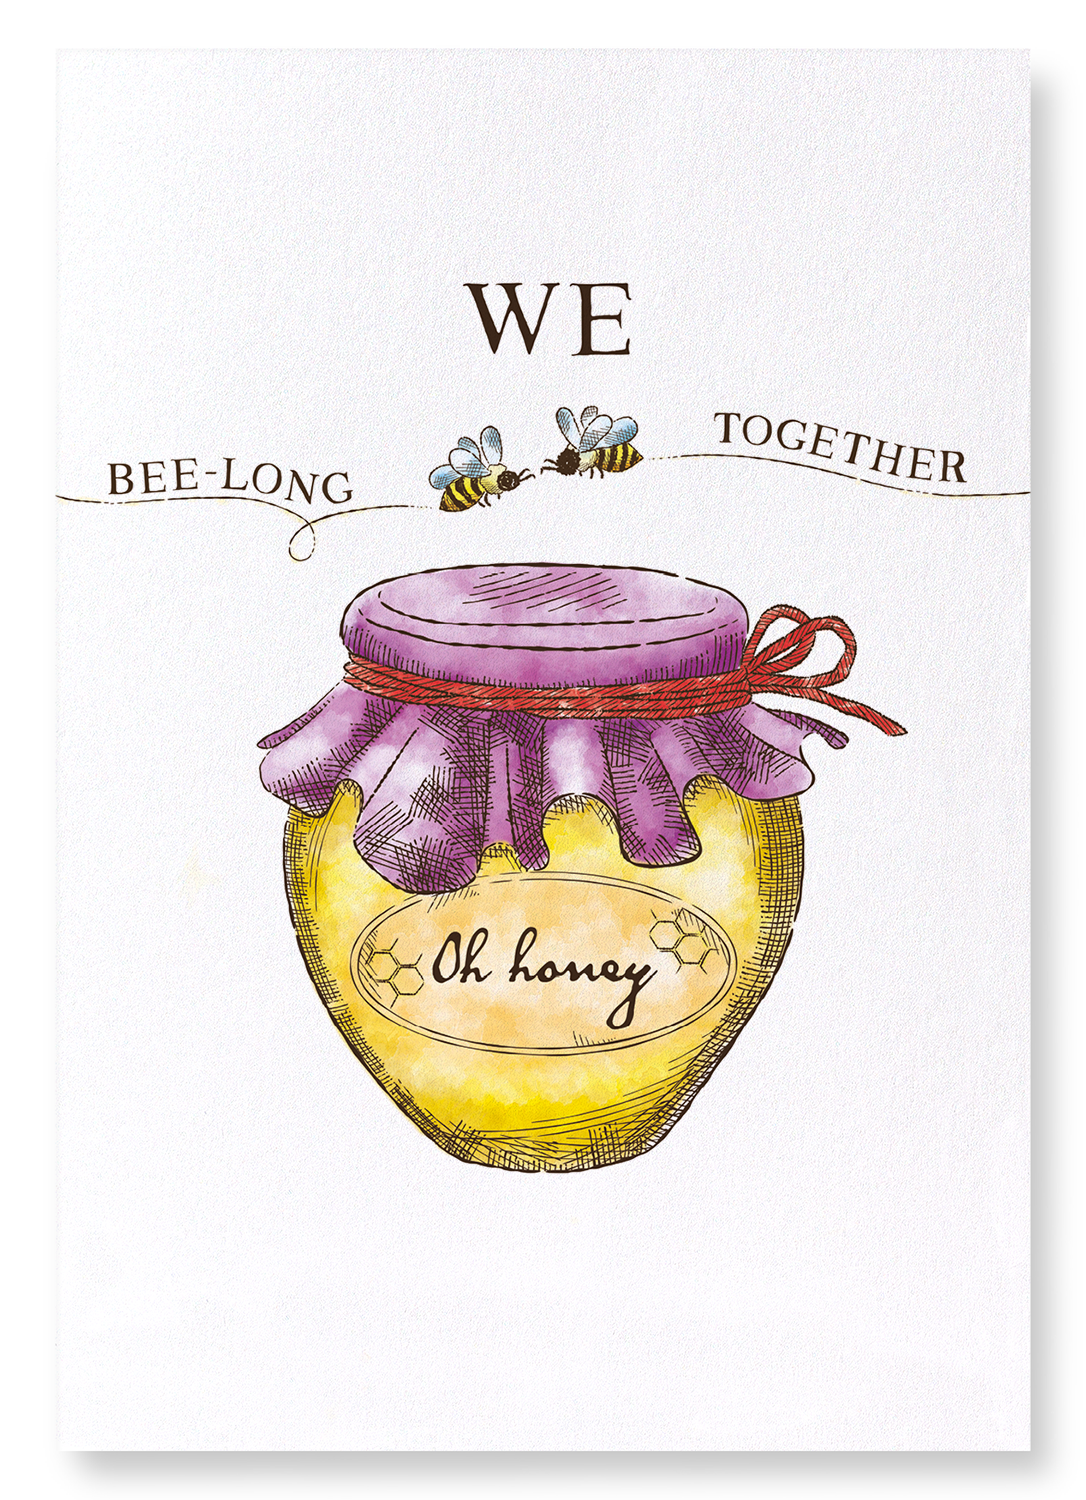 WE BEE-LONG TOGETHER: Victorian Art Print